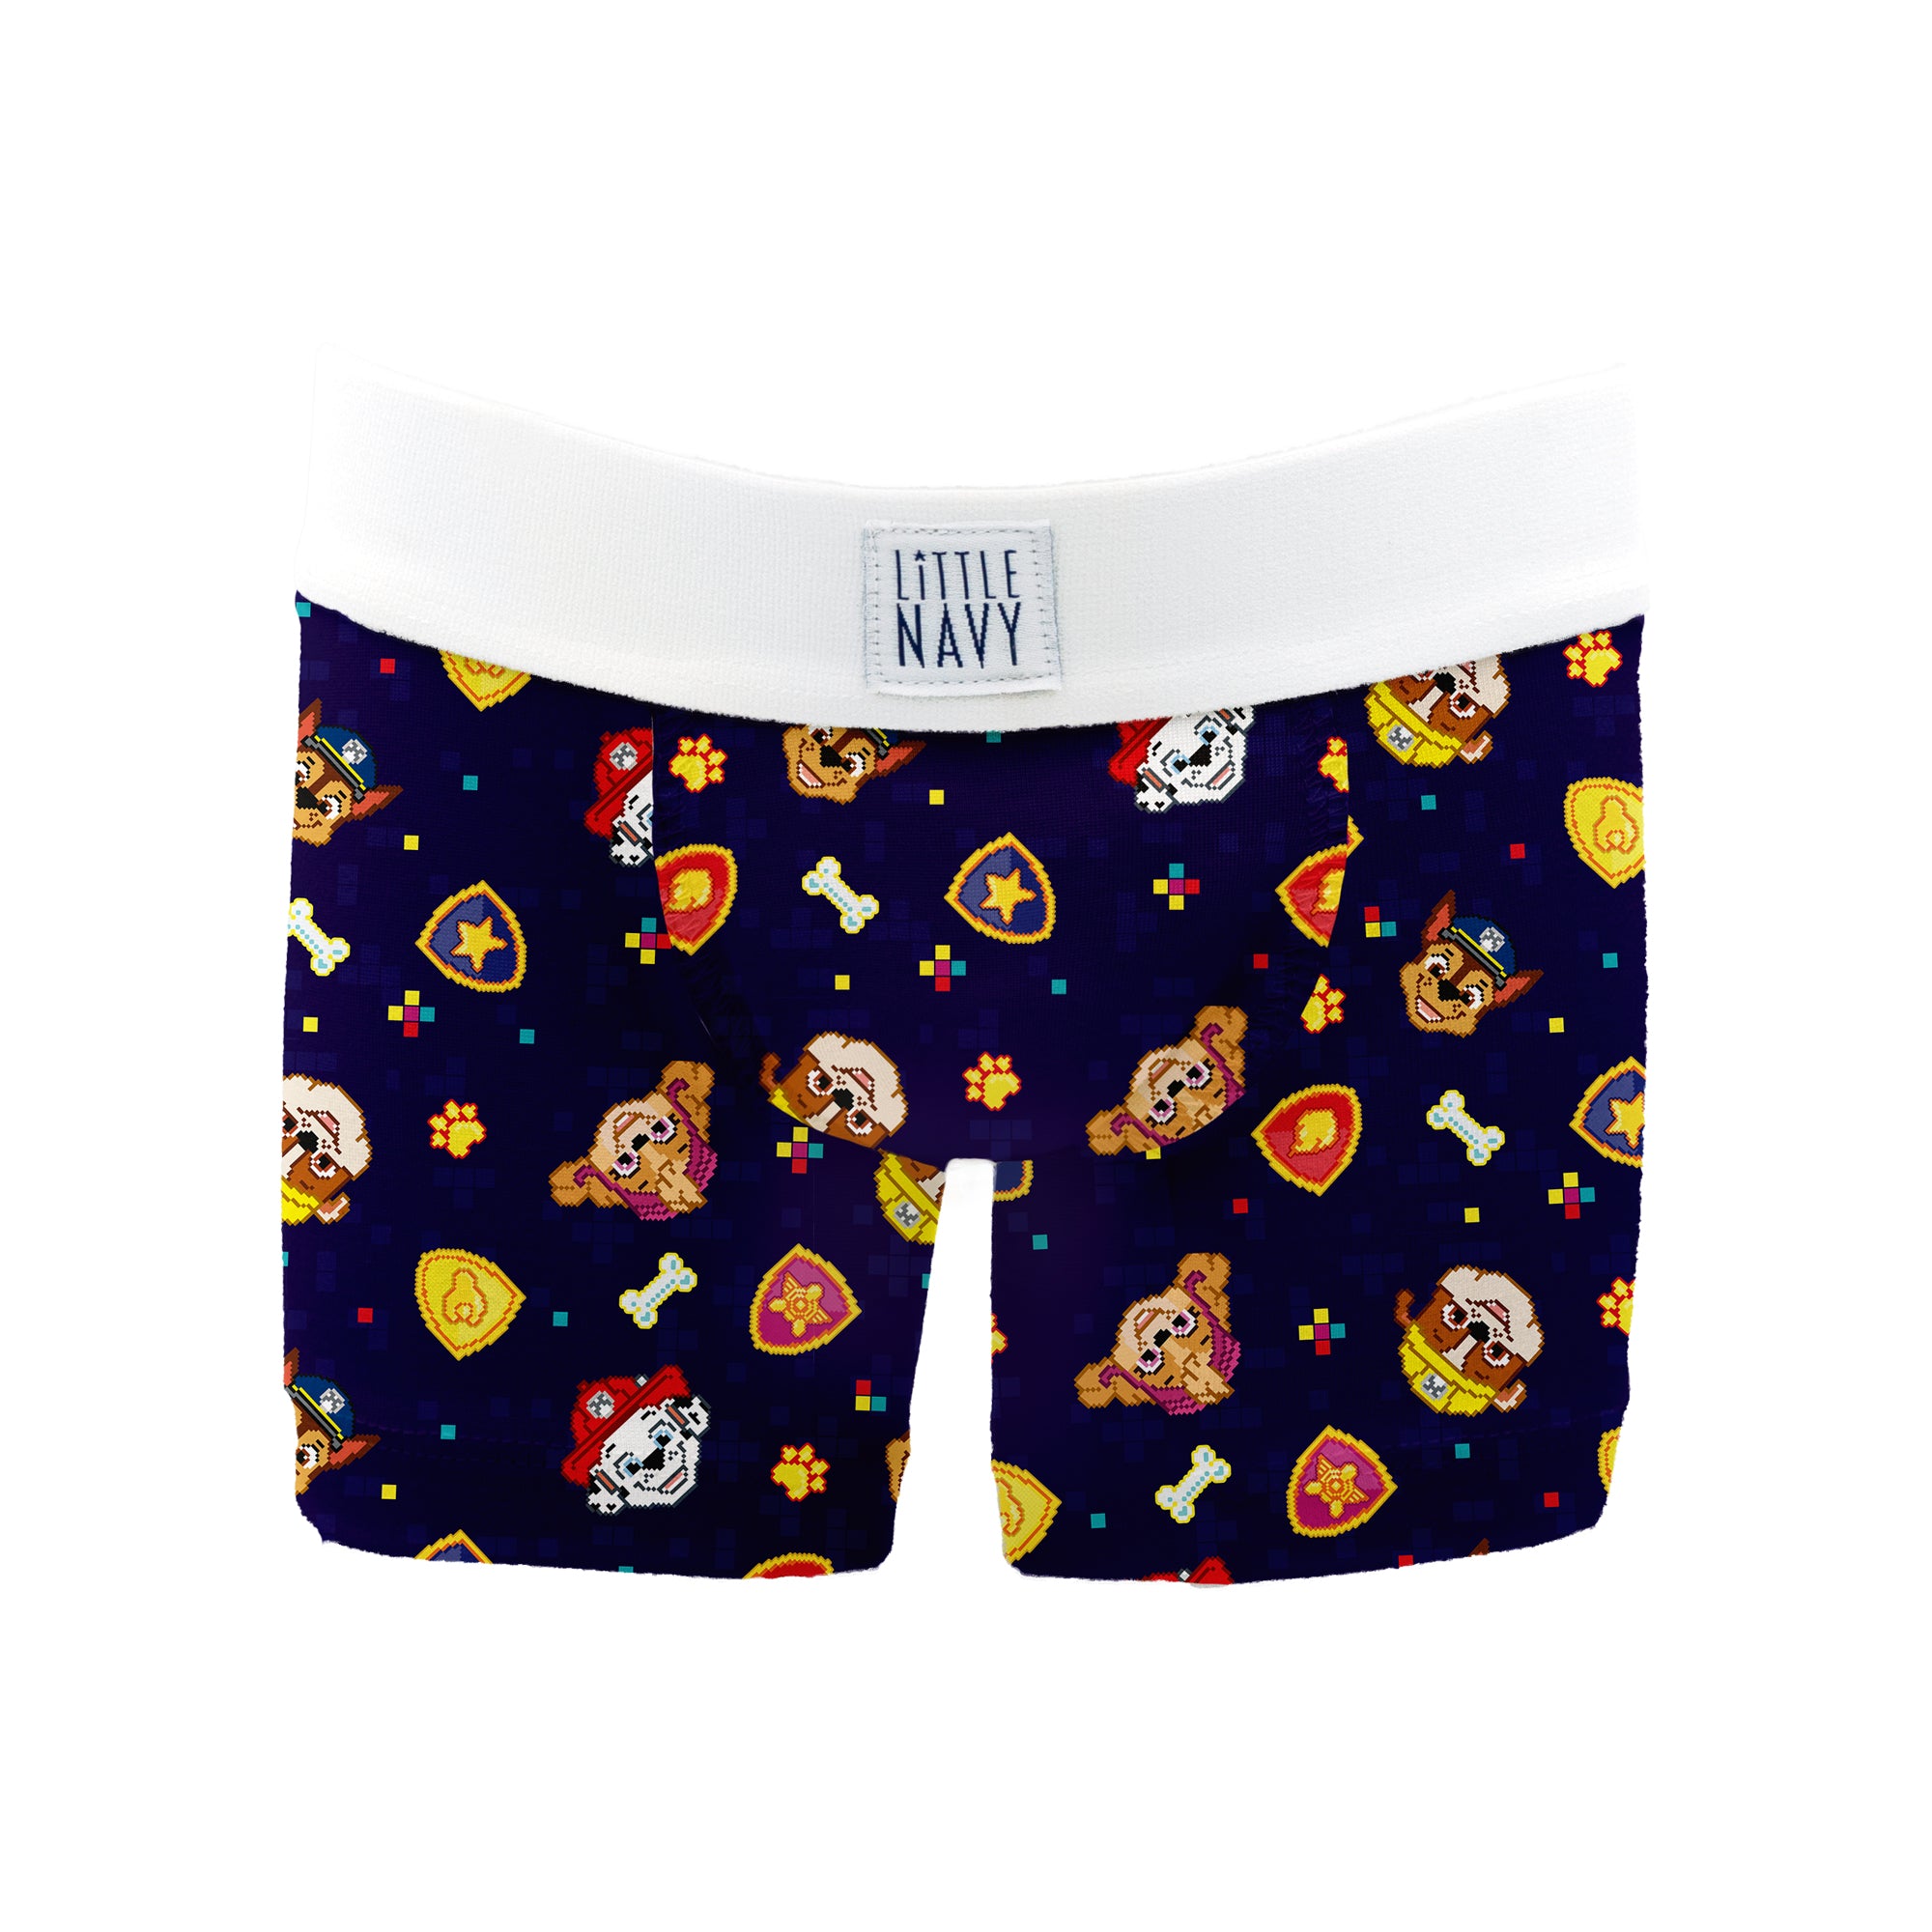 Paw Patrol - Premium Boys Boxer Brief (3 pack) NON-PERSONALIZED GAME O -  Little Navy